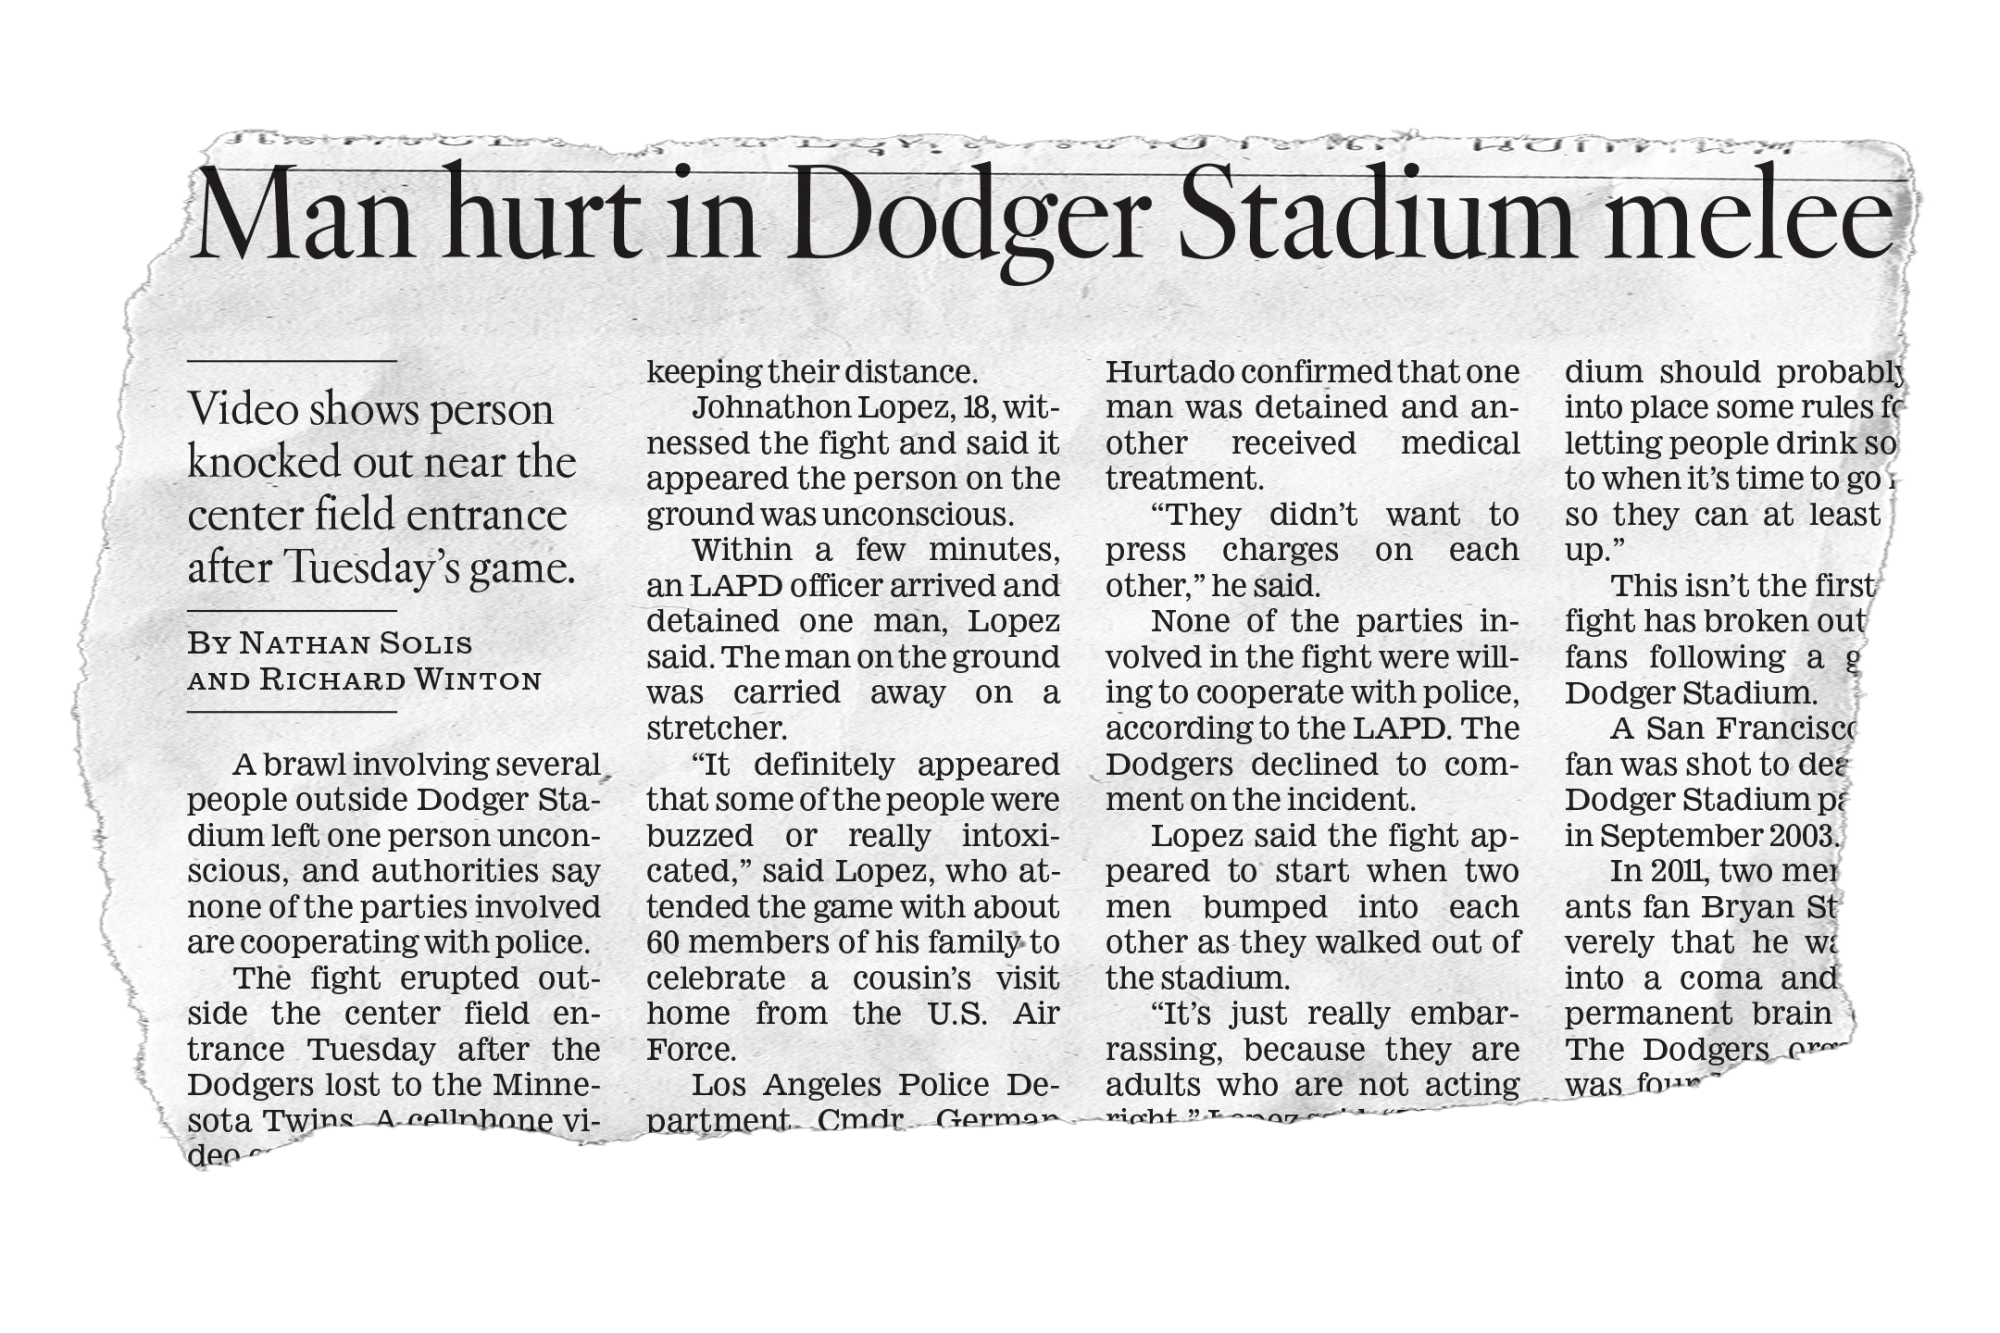 A newspaper clipping for an old story, with the headline "Man hurt in Dodger Stadium melee"